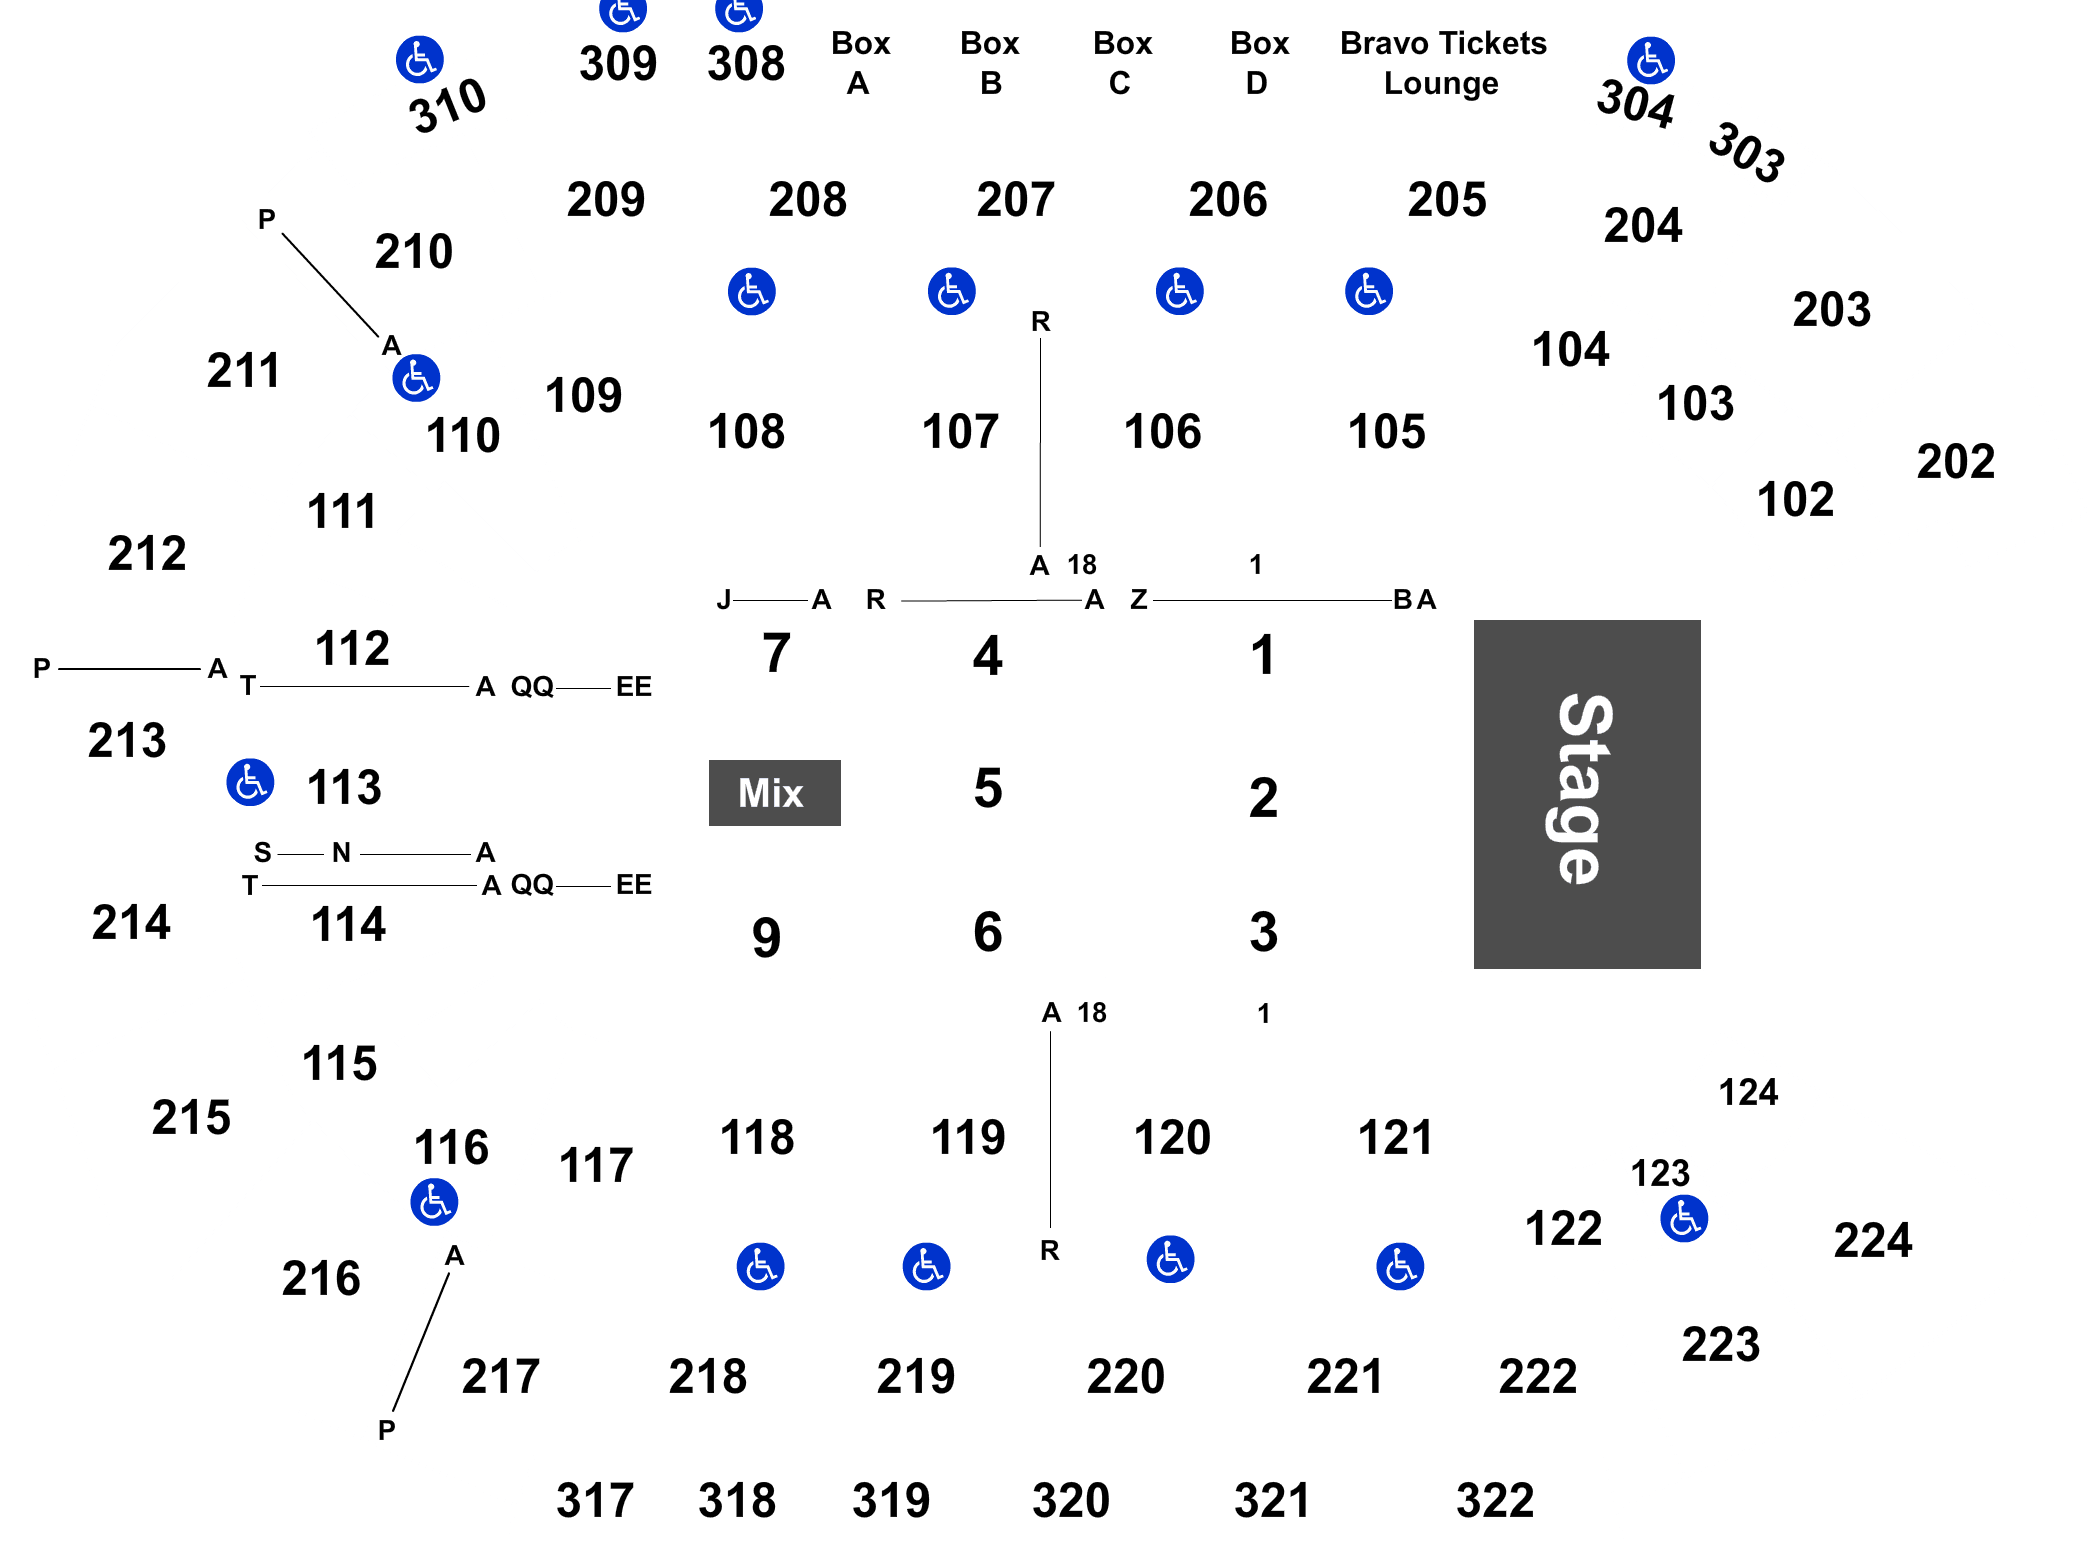 Mandalay Event Center Seating Chart